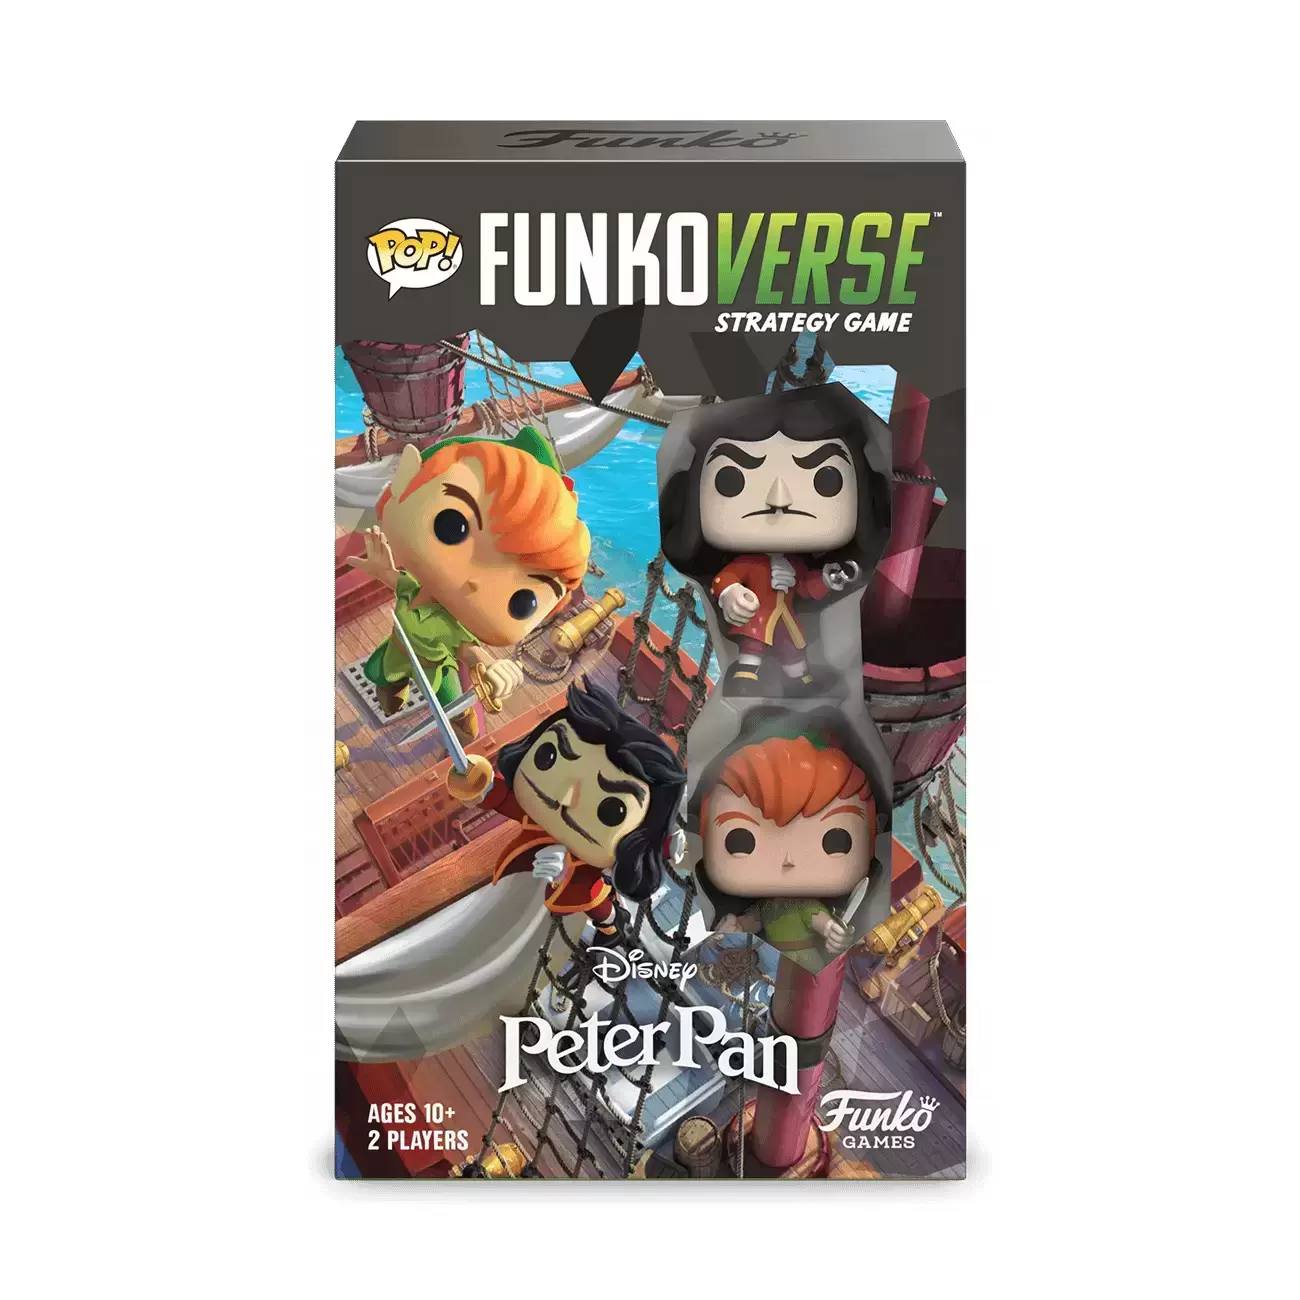 Funko Game - Funkoverse - Peter Pan Strategy Game 2 Players